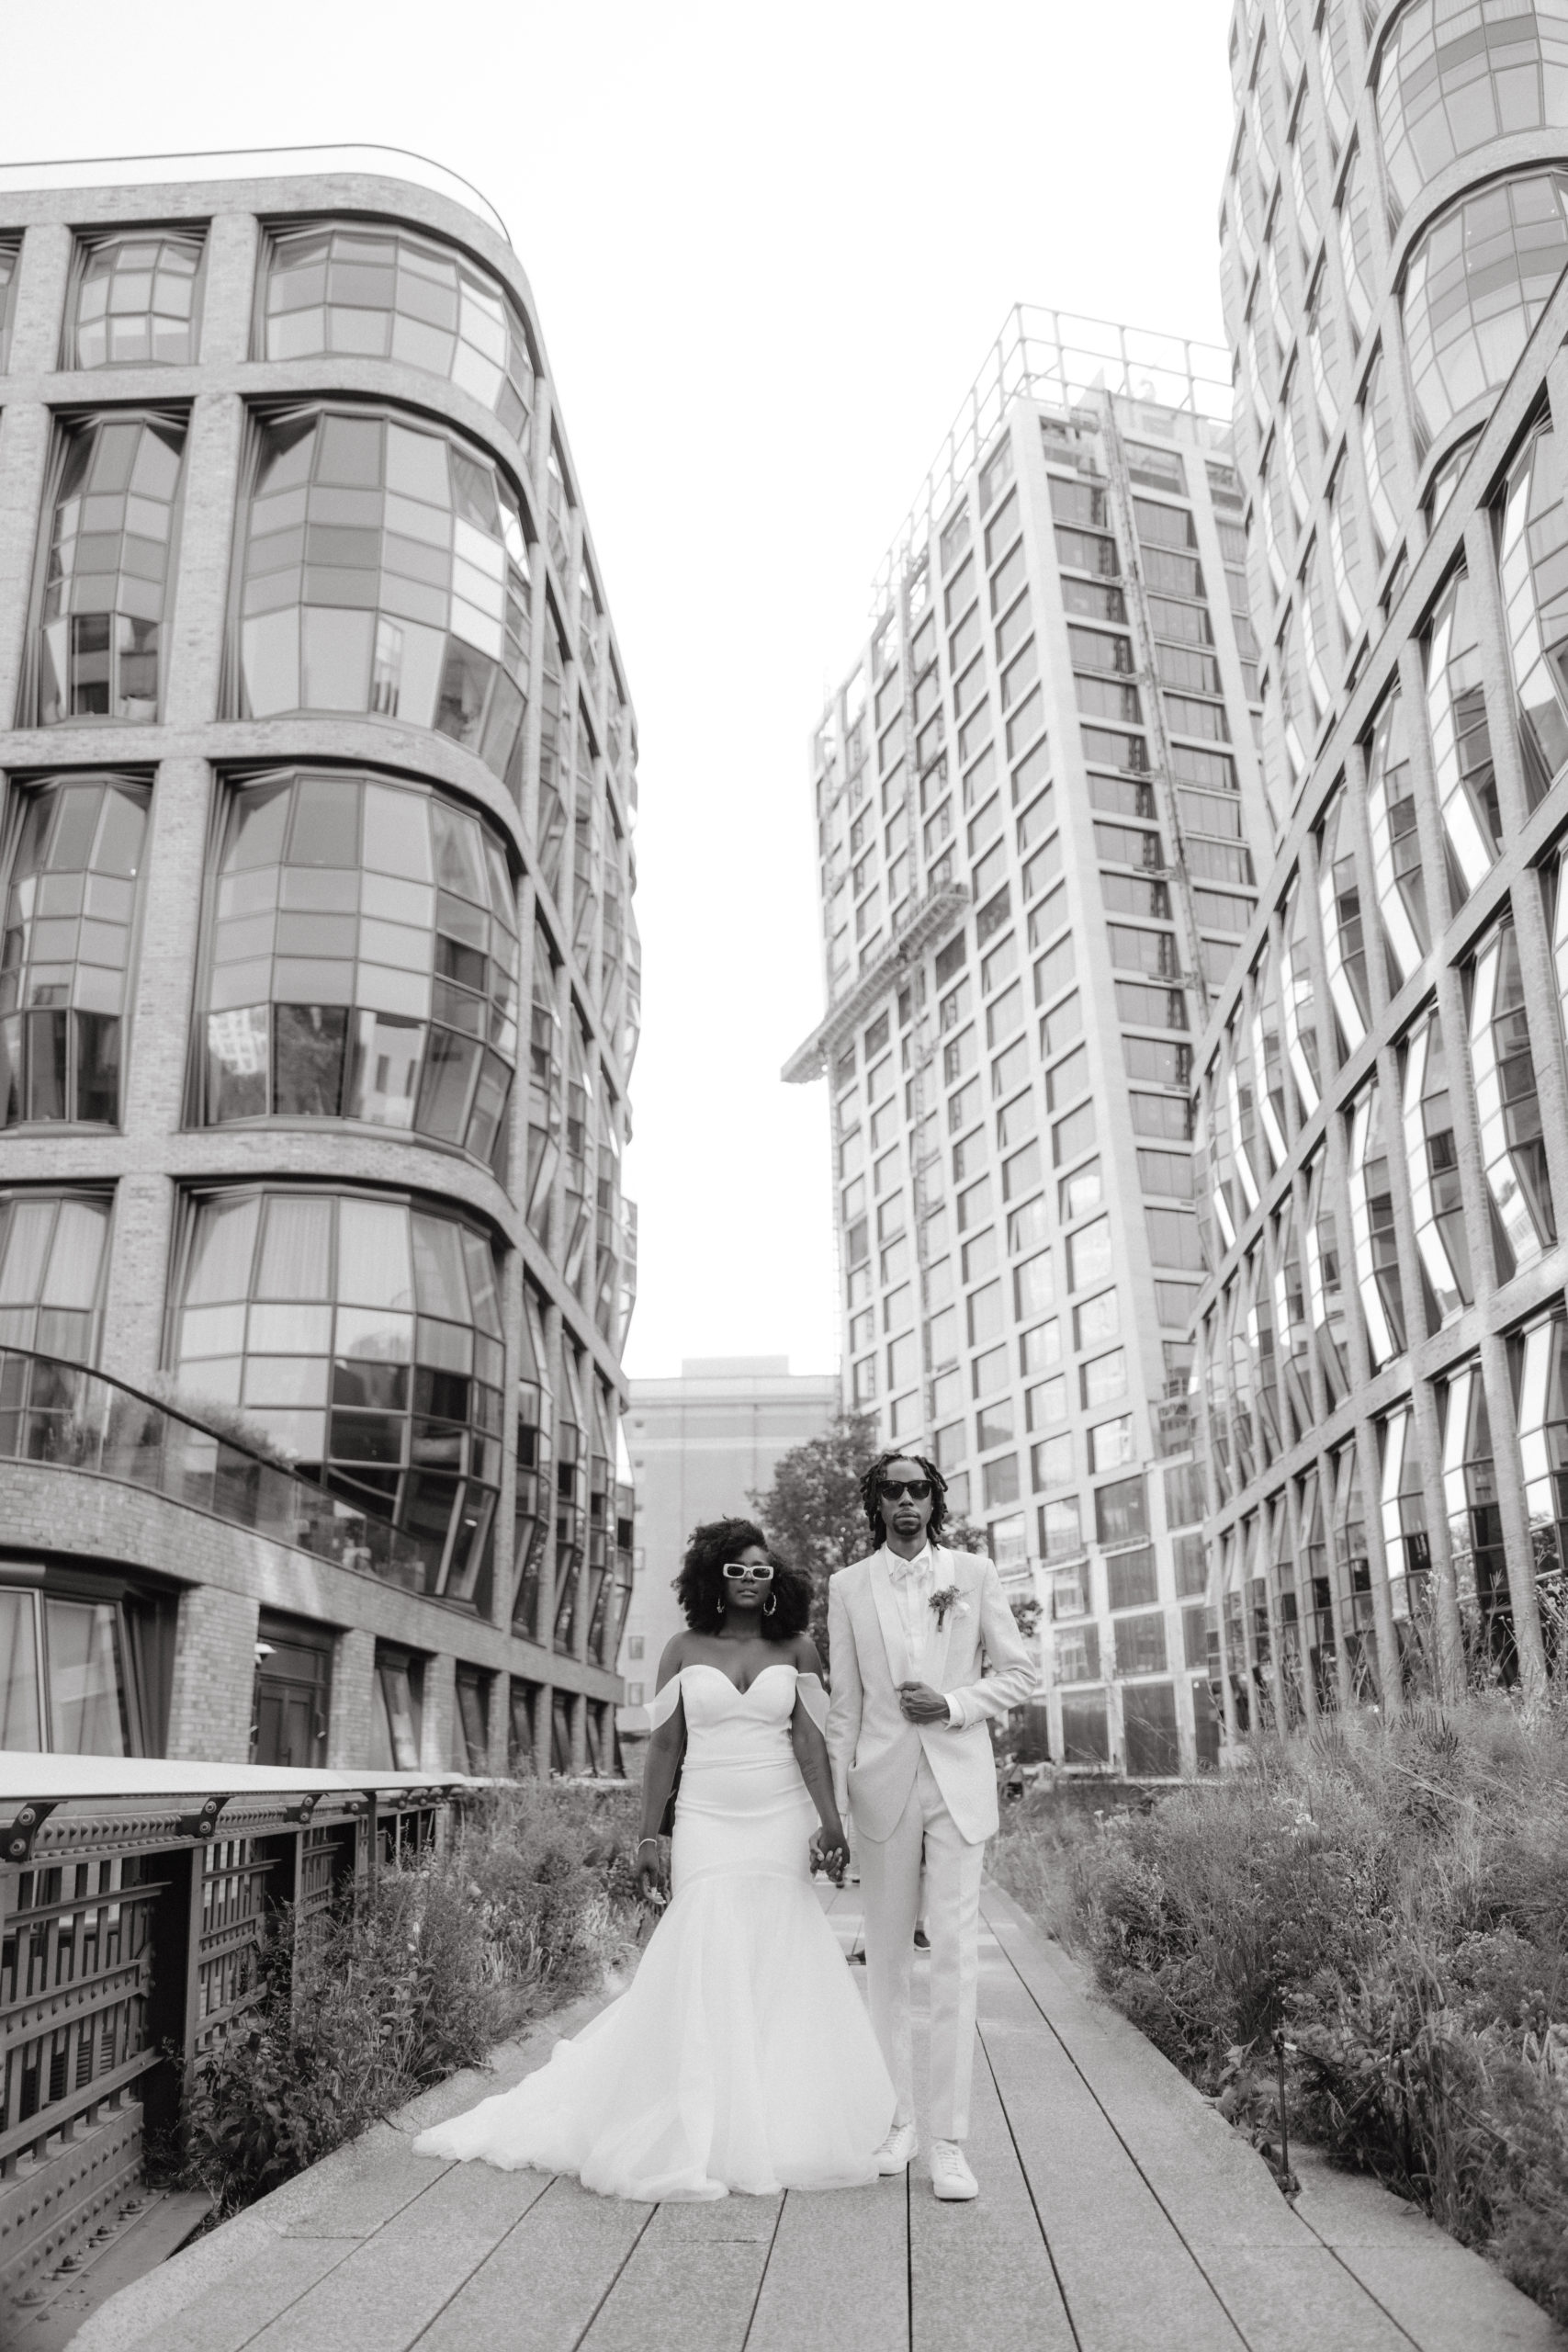 Black and white photo of the bride and groom with NYC skyscrapers in the background. Elopement image by Jenny Fu Studio